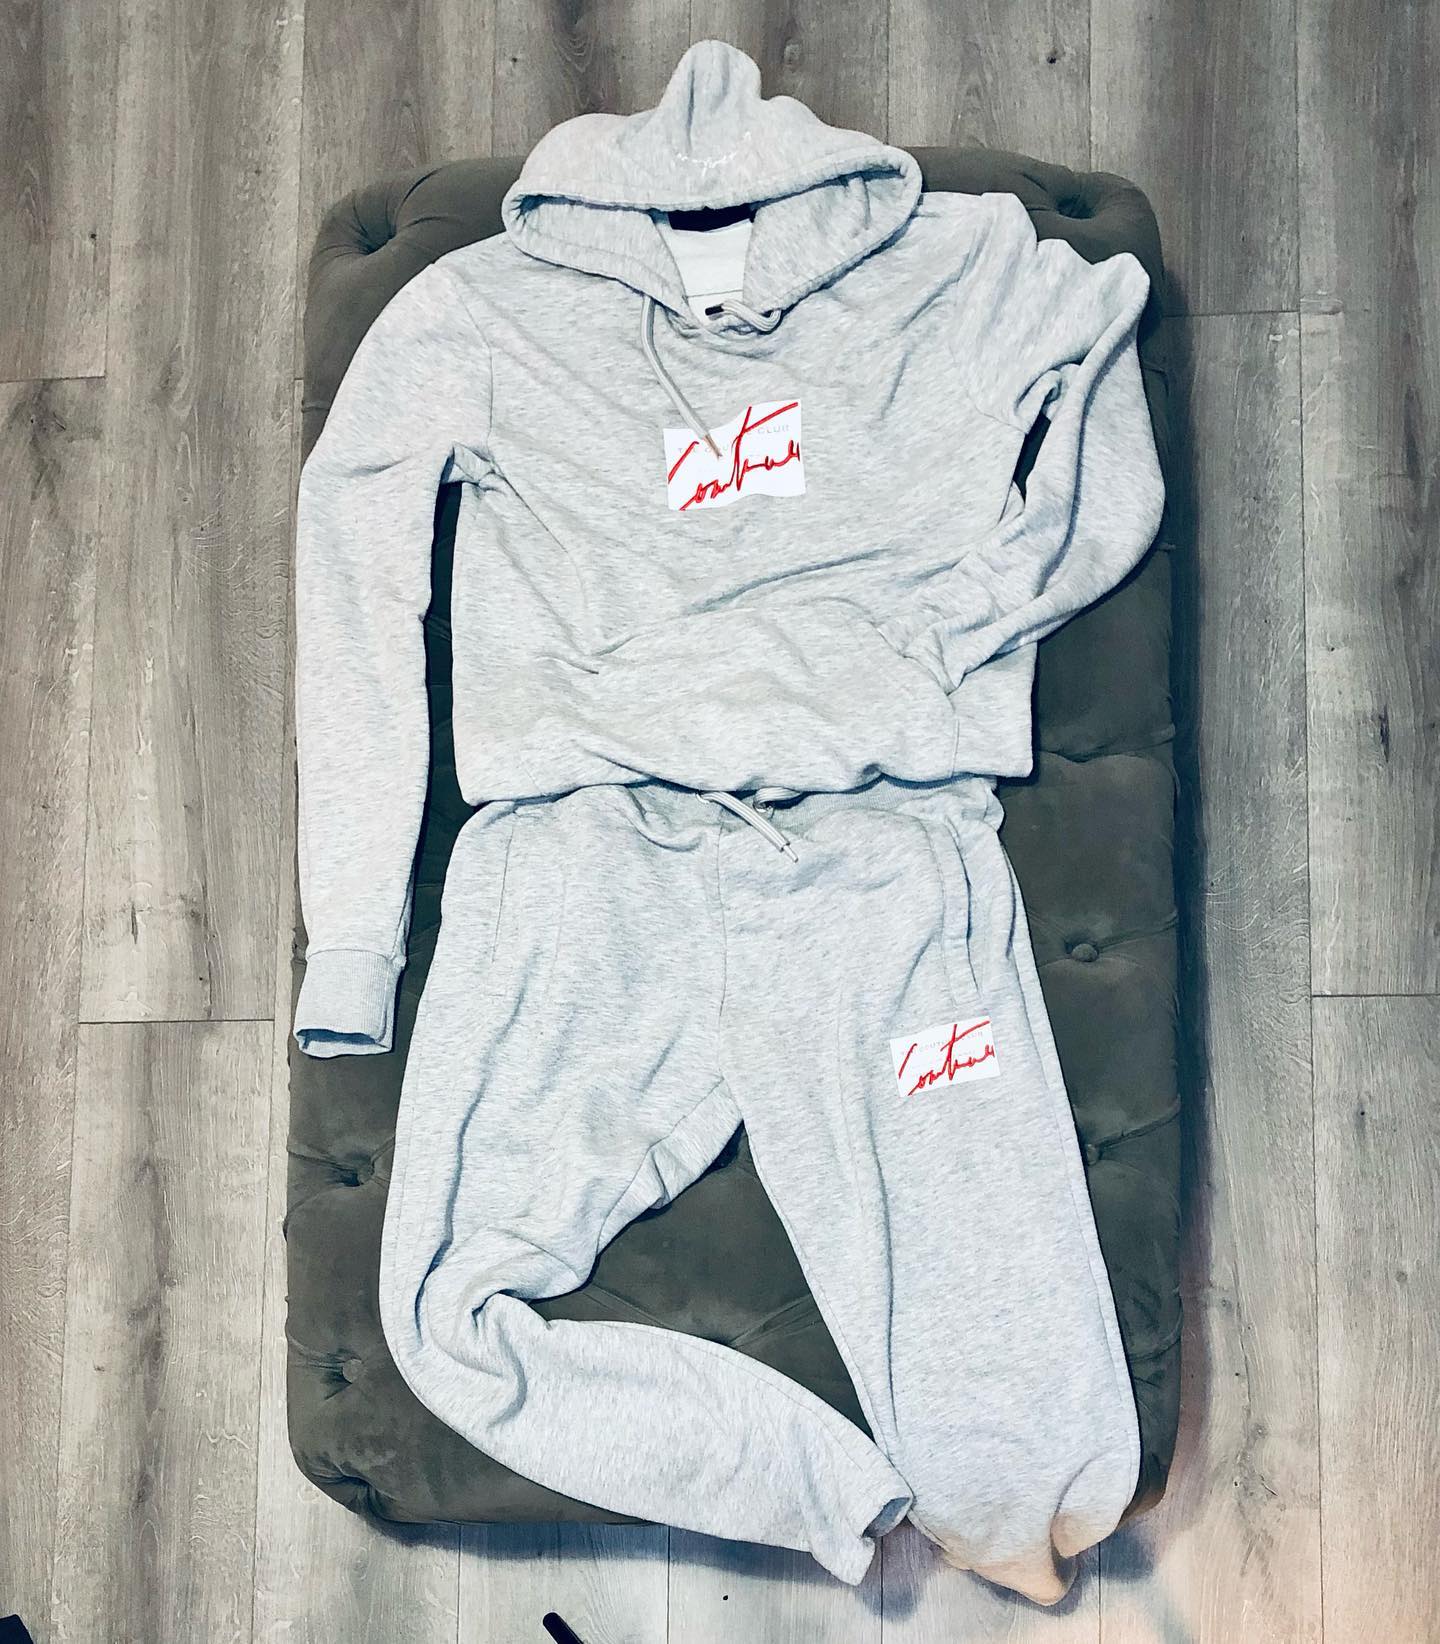 THE COUTURE CLUB GREY JERSEY HOODY TRACKSUIT
Size s